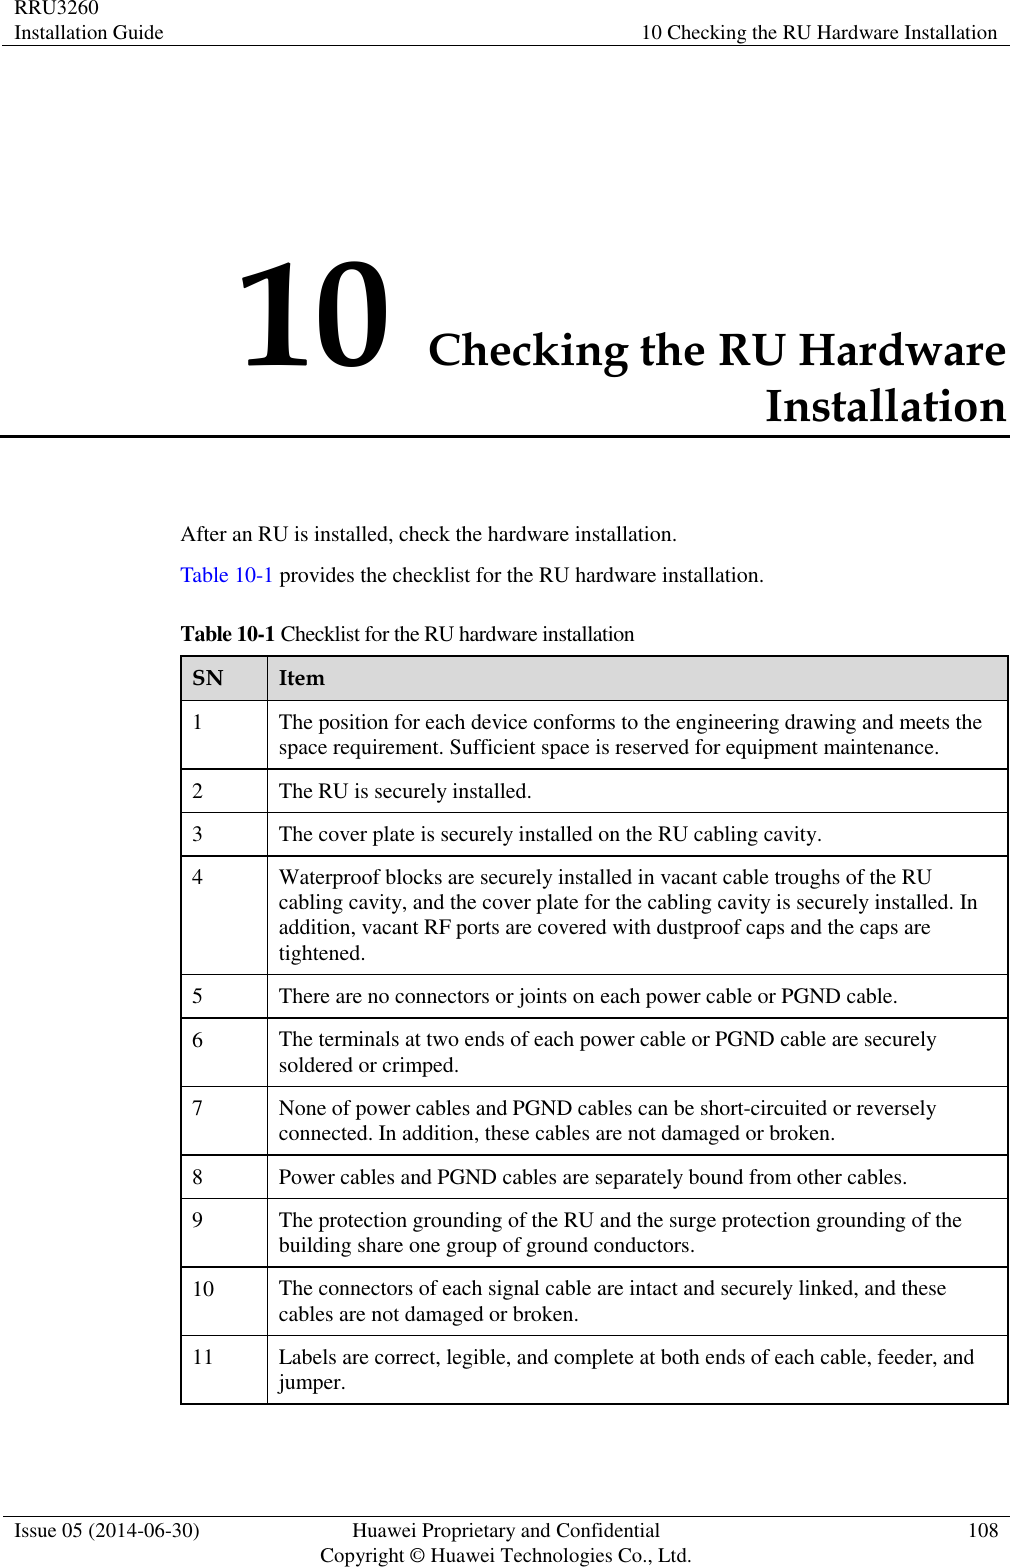 RRU3260 Installation Guide 10 Checking the RU Hardware Installation  Issue 05 (2014-06-30) Huawei Proprietary and Confidential                                     Copyright © Huawei Technologies Co., Ltd. 108  10 Checking the RU Hardware Installation After an RU is installed, check the hardware installation.   Table 10-1 provides the checklist for the RU hardware installation. Table 10-1 Checklist for the RU hardware installation SN Item 1 The position for each device conforms to the engineering drawing and meets the space requirement. Sufficient space is reserved for equipment maintenance.   2 The RU is securely installed. 3 The cover plate is securely installed on the RU cabling cavity.   4 Waterproof blocks are securely installed in vacant cable troughs of the RU cabling cavity, and the cover plate for the cabling cavity is securely installed. In addition, vacant RF ports are covered with dustproof caps and the caps are tightened. 5 There are no connectors or joints on each power cable or PGND cable.   6 The terminals at two ends of each power cable or PGND cable are securely soldered or crimped. 7 None of power cables and PGND cables can be short-circuited or reversely connected. In addition, these cables are not damaged or broken. 8 Power cables and PGND cables are separately bound from other cables.   9 The protection grounding of the RU and the surge protection grounding of the building share one group of ground conductors. 10 The connectors of each signal cable are intact and securely linked, and these cables are not damaged or broken. 11 Labels are correct, legible, and complete at both ends of each cable, feeder, and jumper. 